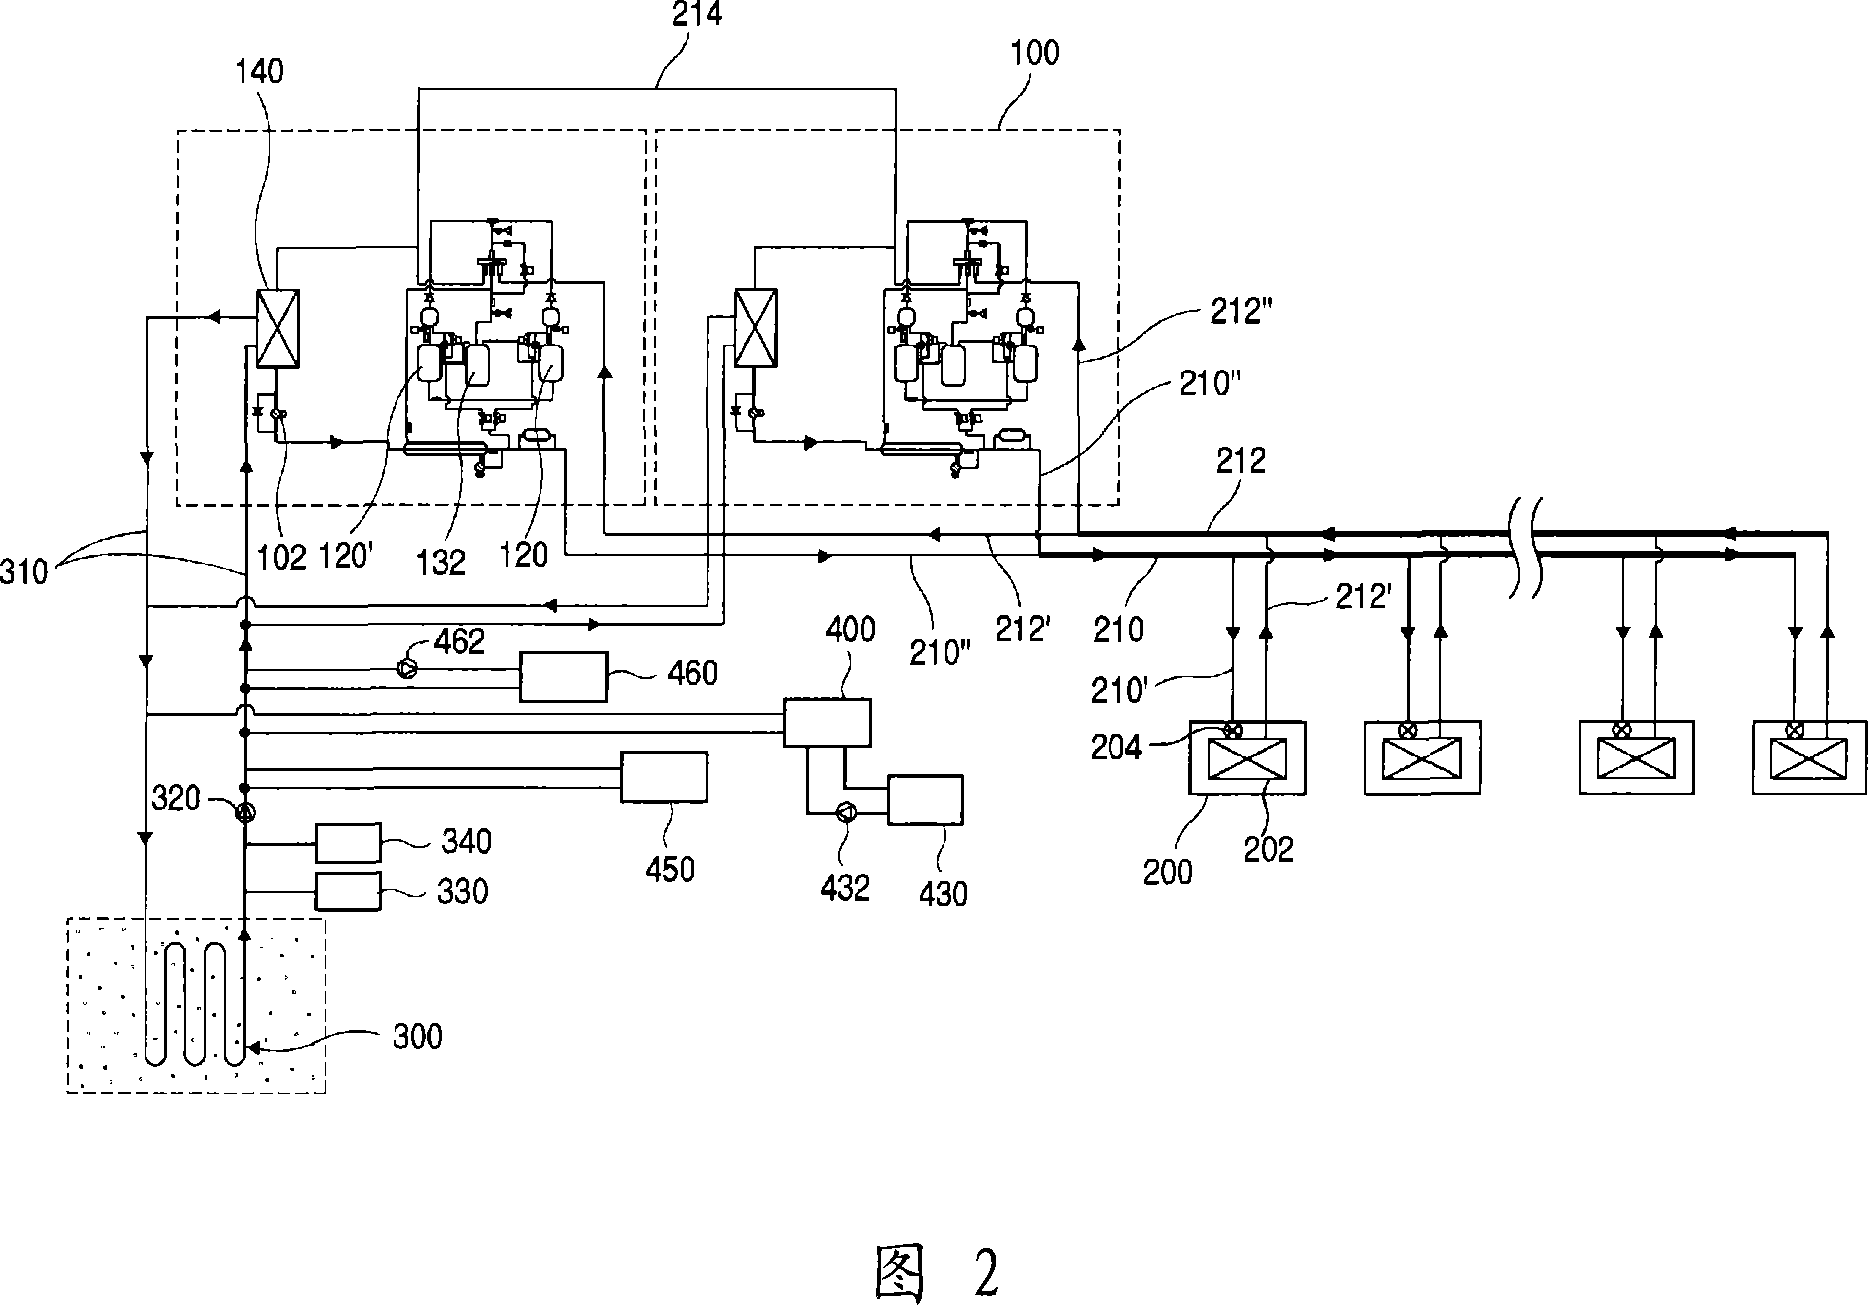 Air conditioning system using ground heat